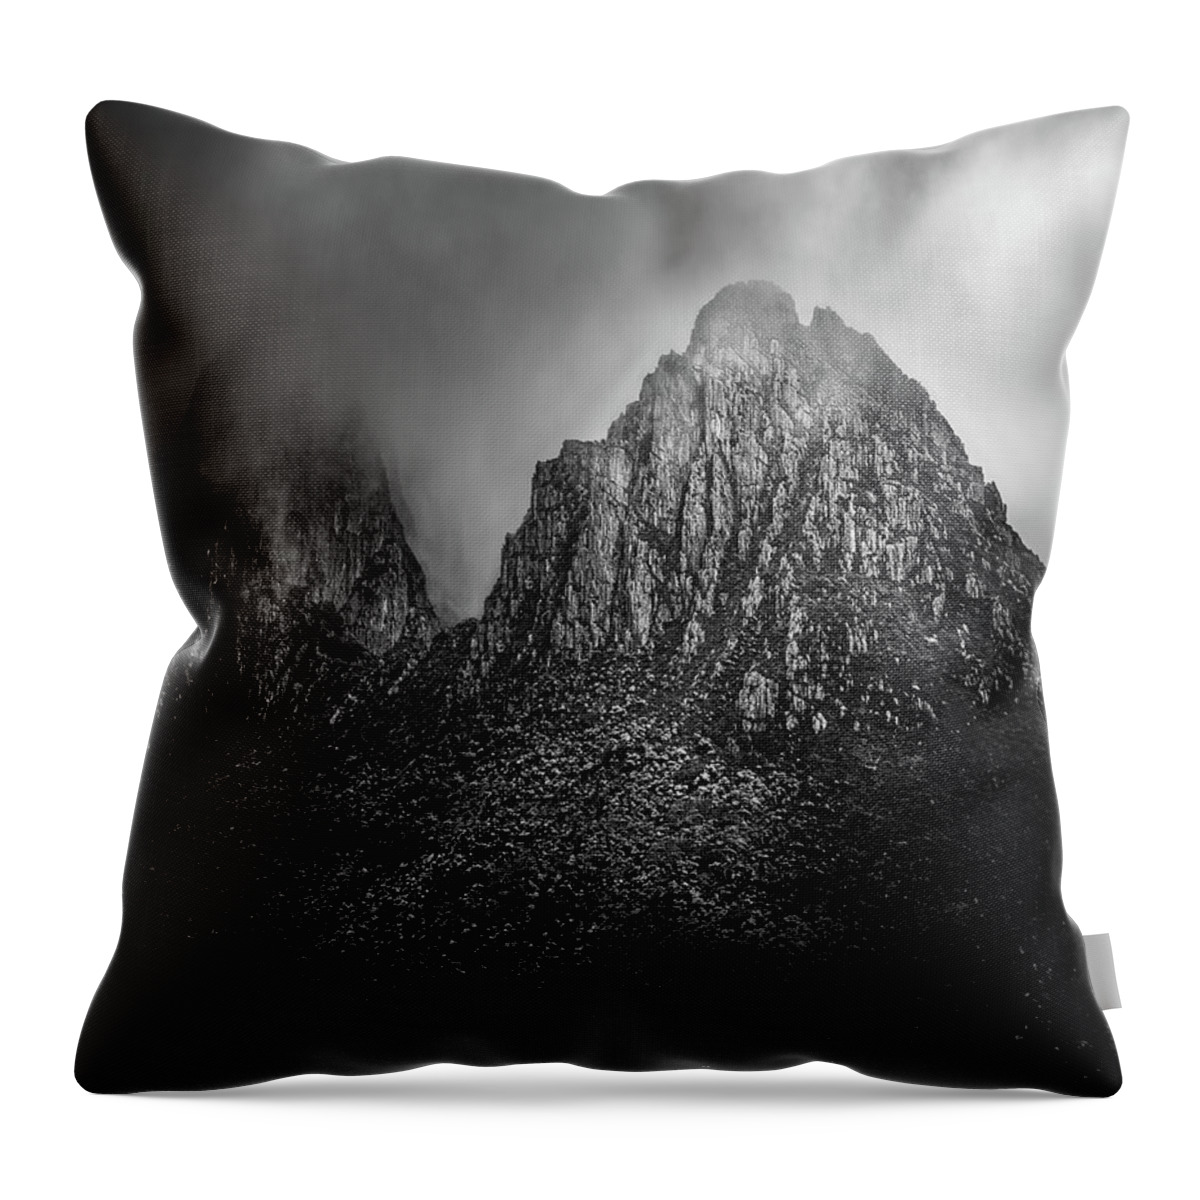 Monochrome Throw Pillow featuring the photograph Mountain by Grant Galbraith